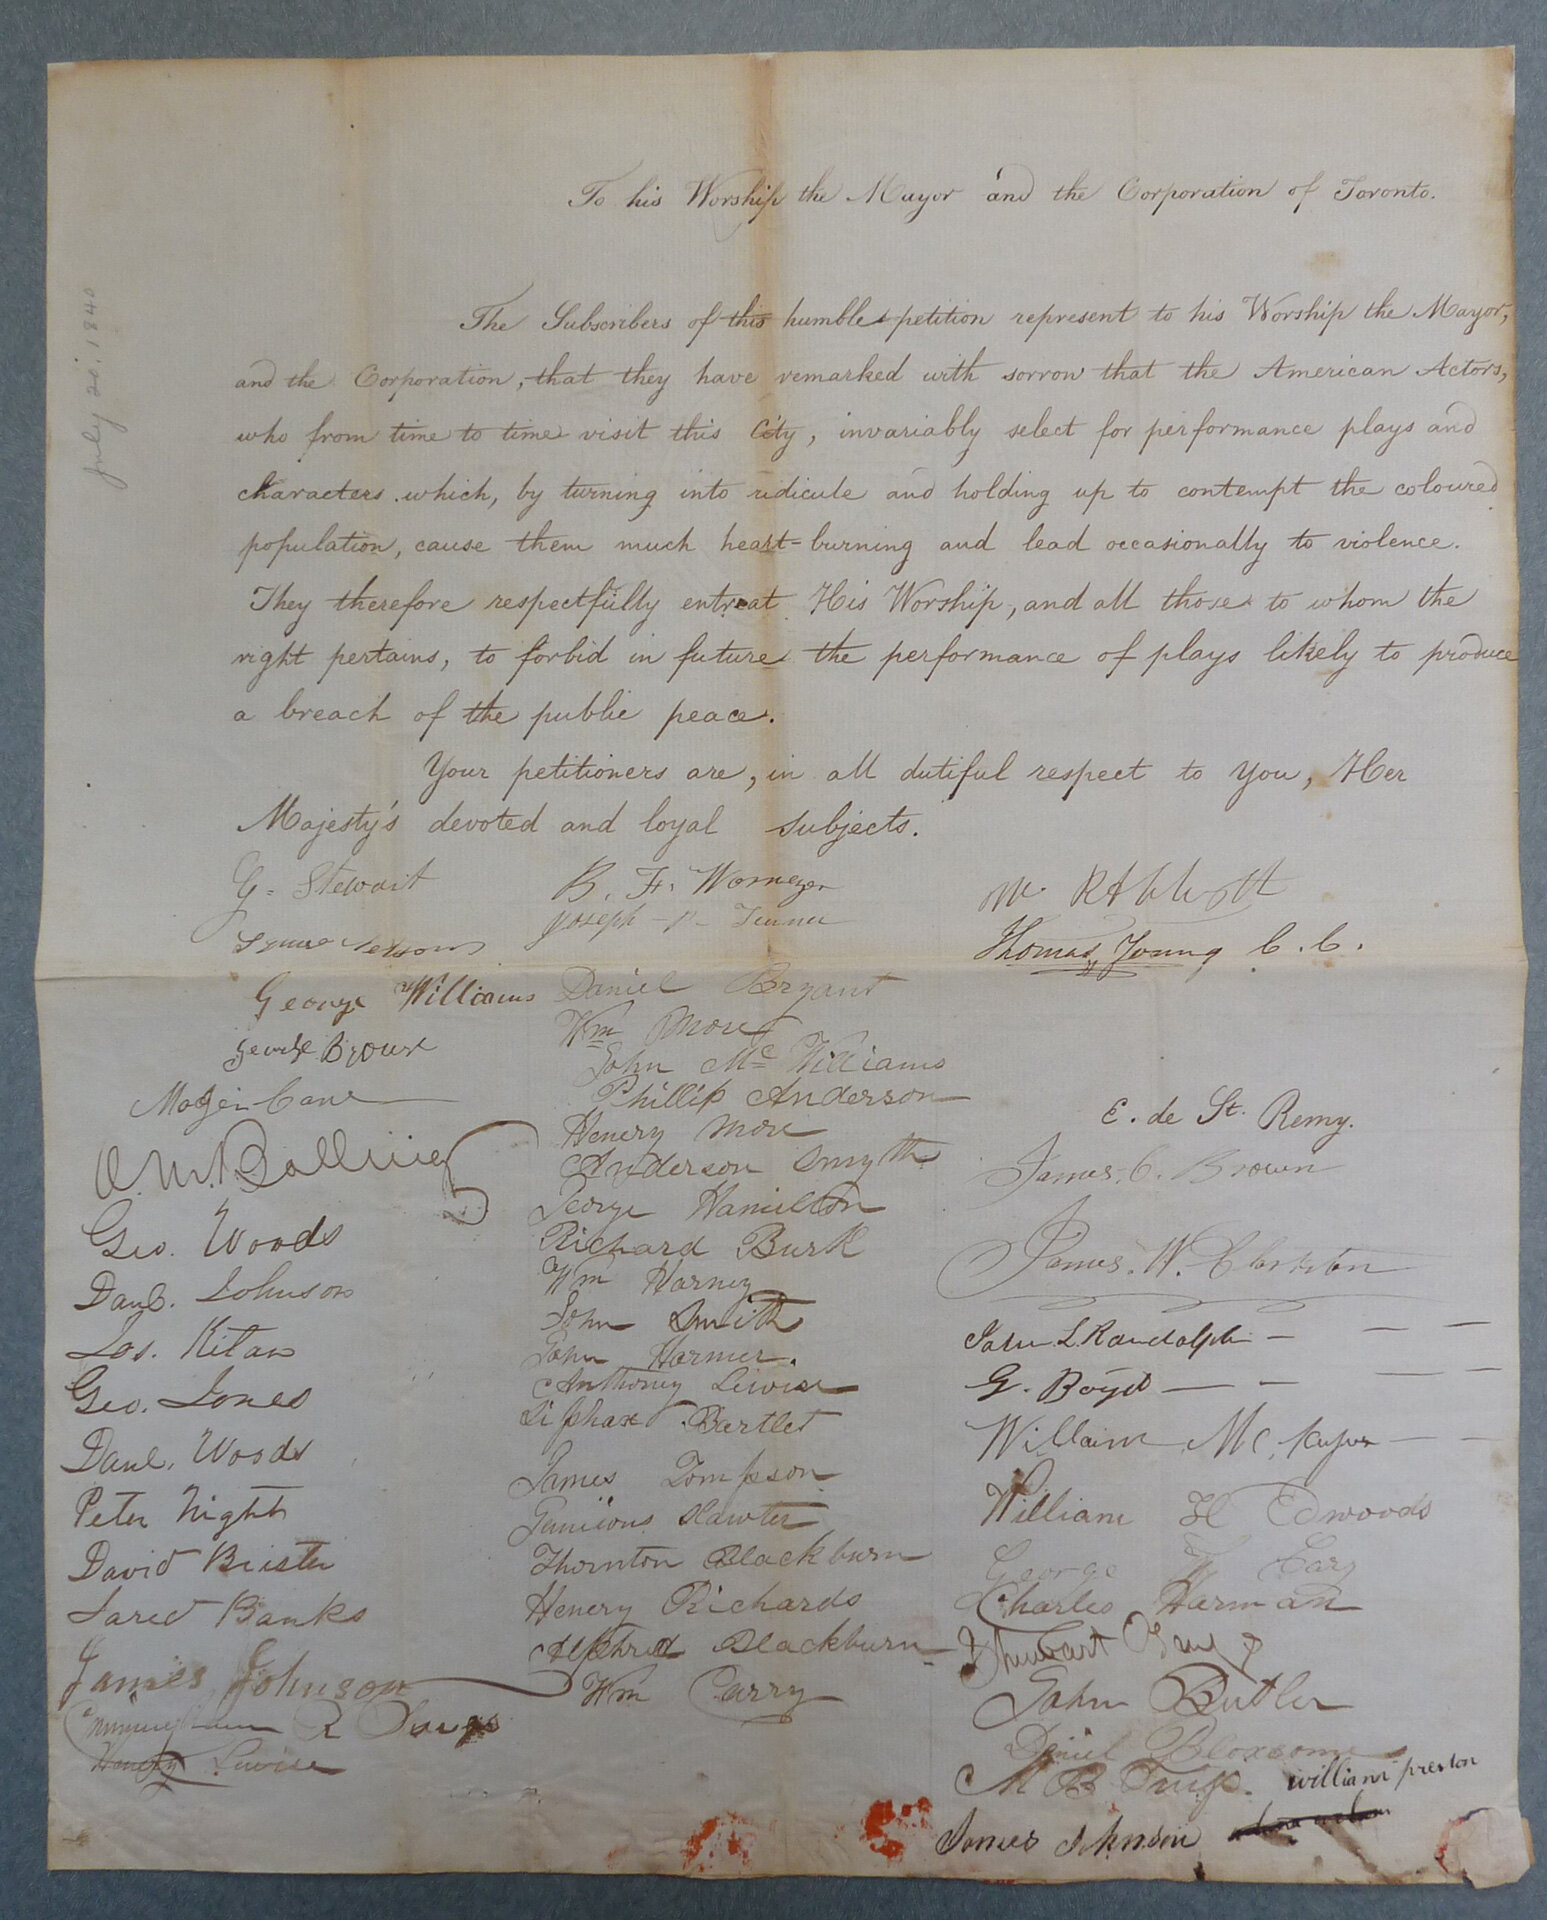 Petition, July 20, 1840